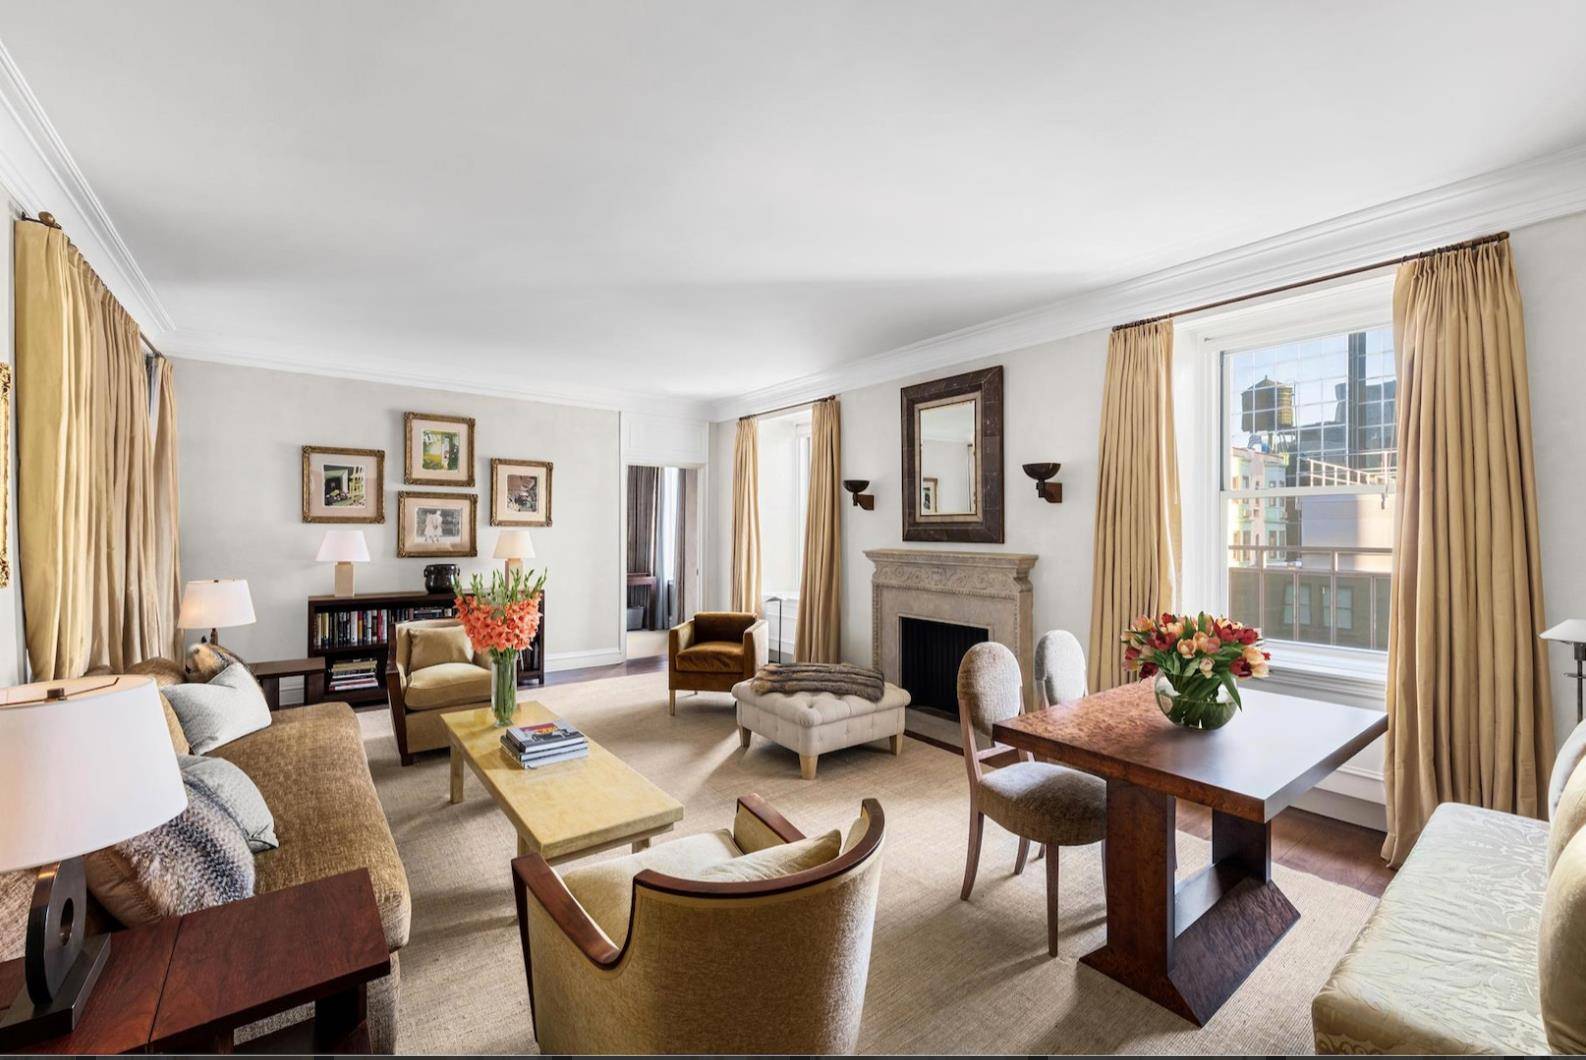 Located in the famed Sherry Netherland on Fifth Avenue, this published and recently renovated residence features 2 bedrooms and 2 custom marble bathrooms.